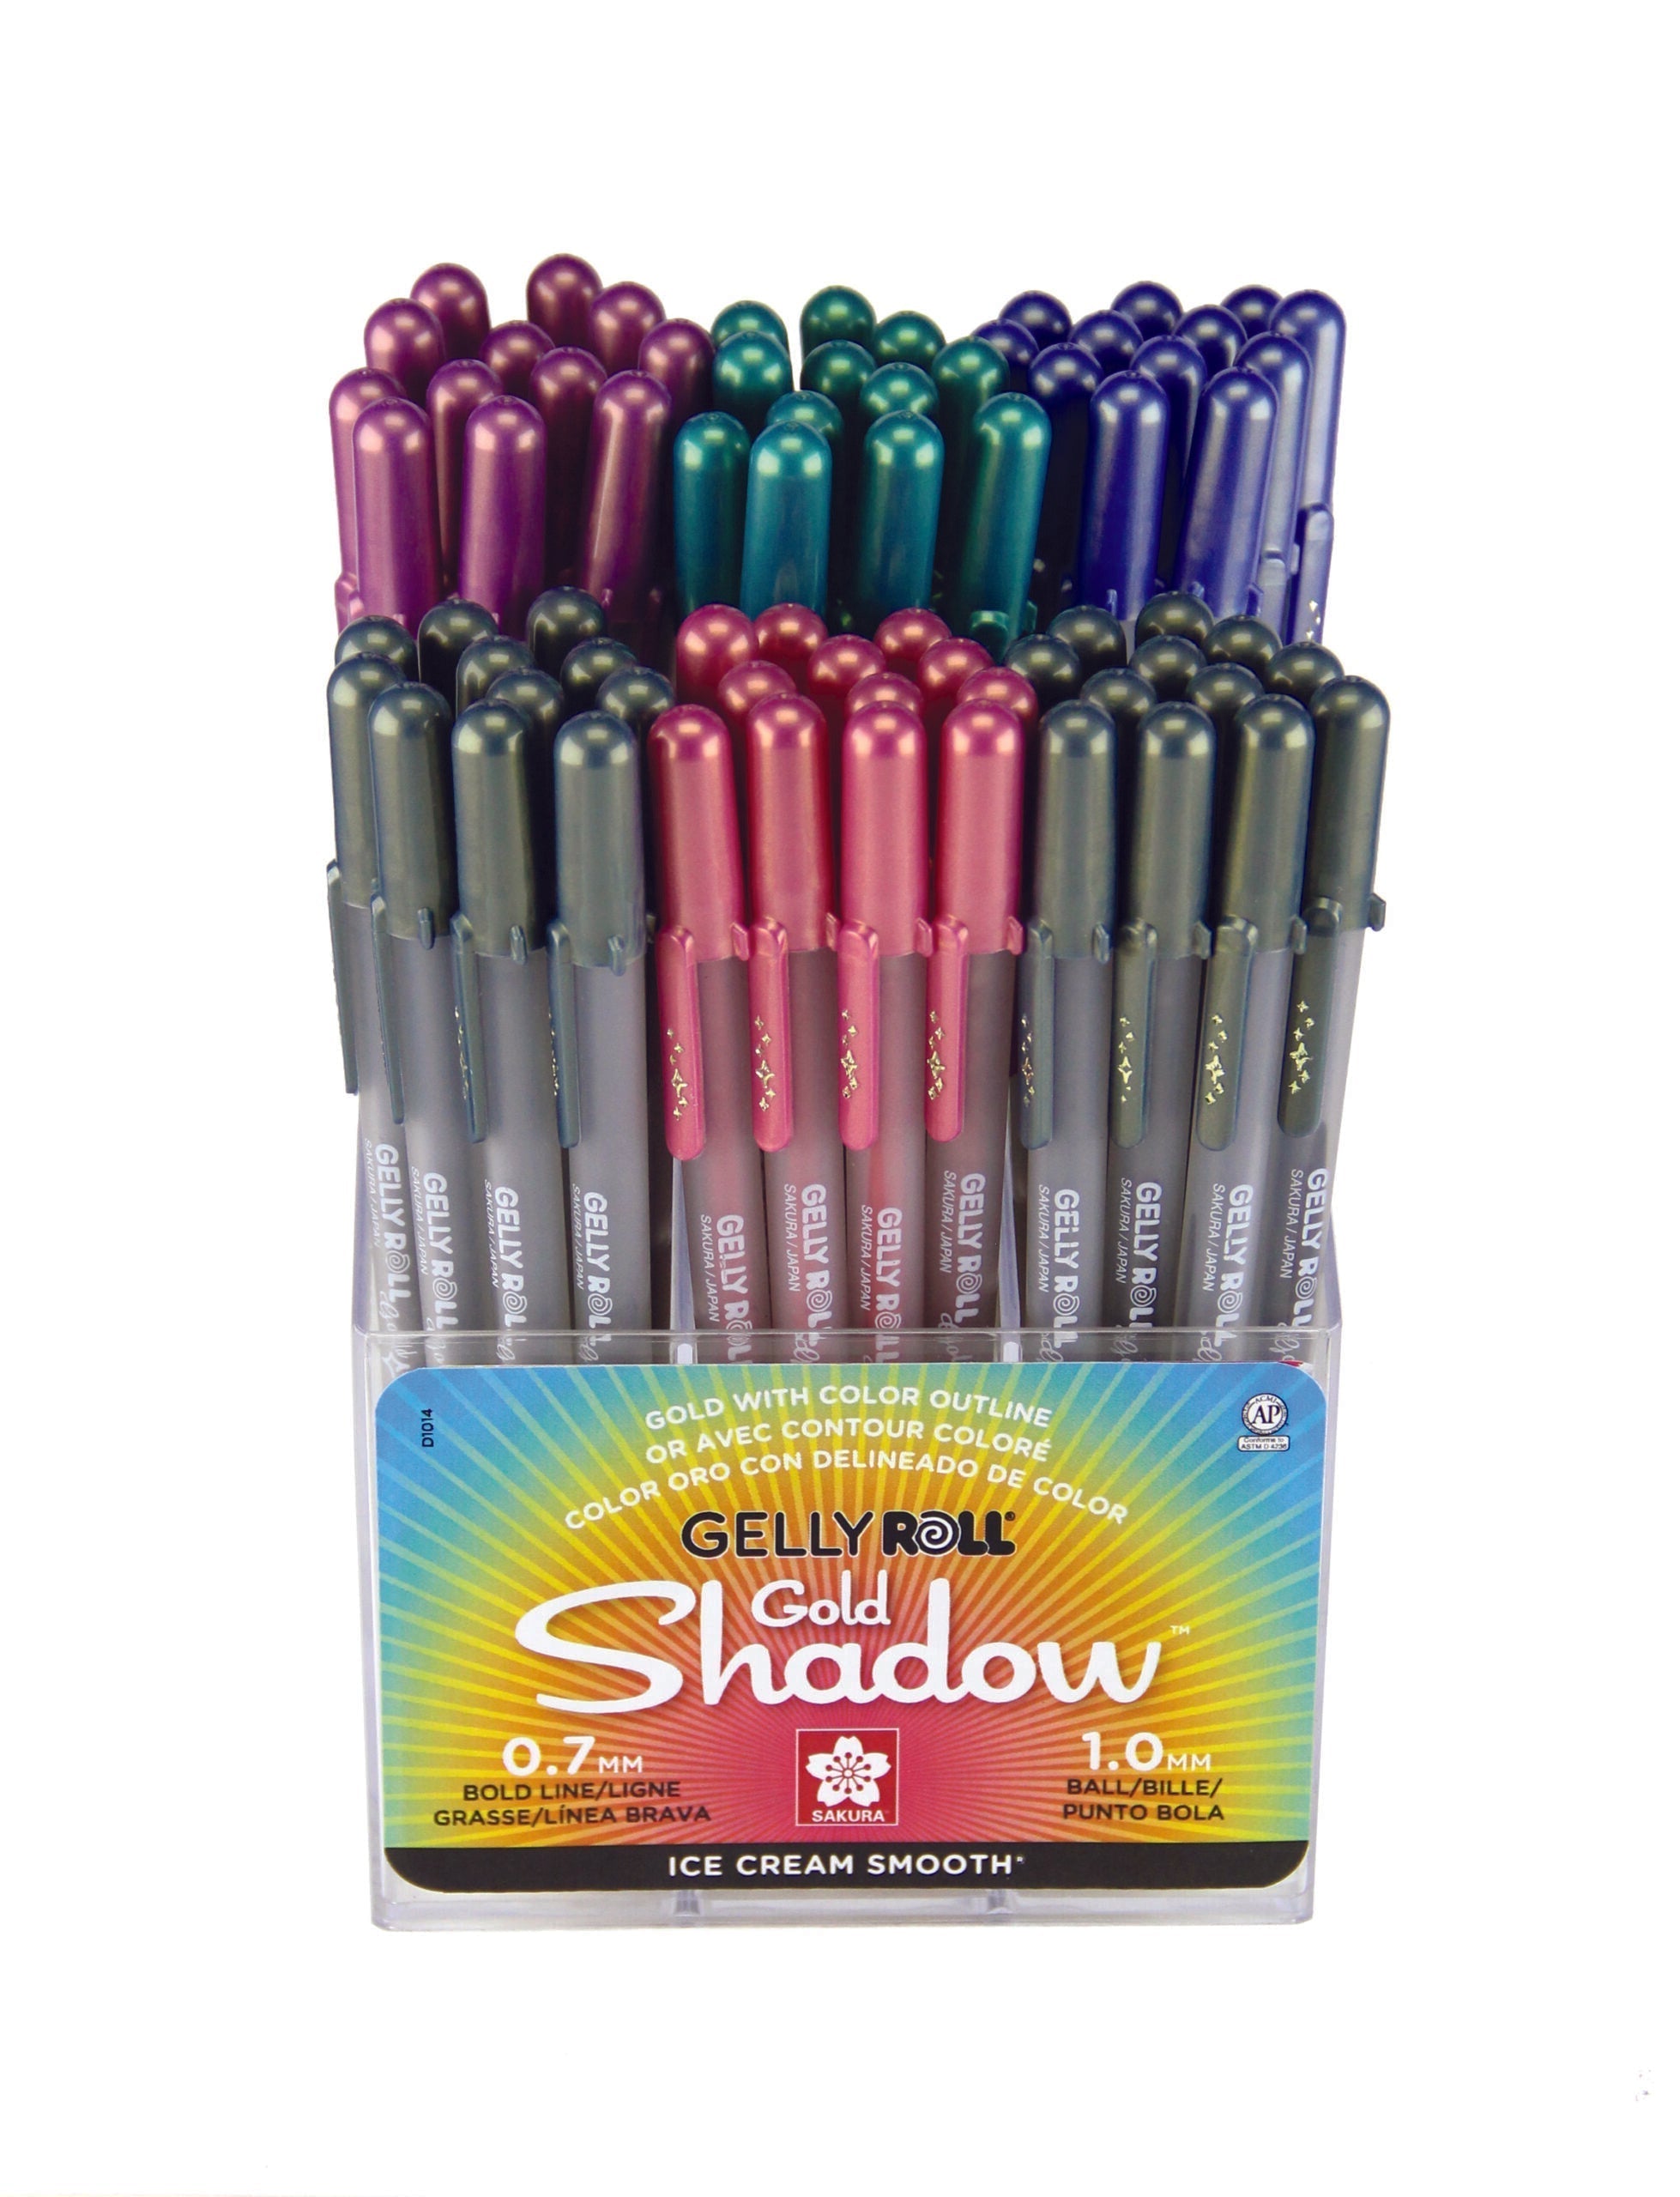 Gelly Roll Gold Shadow Pen - Violet